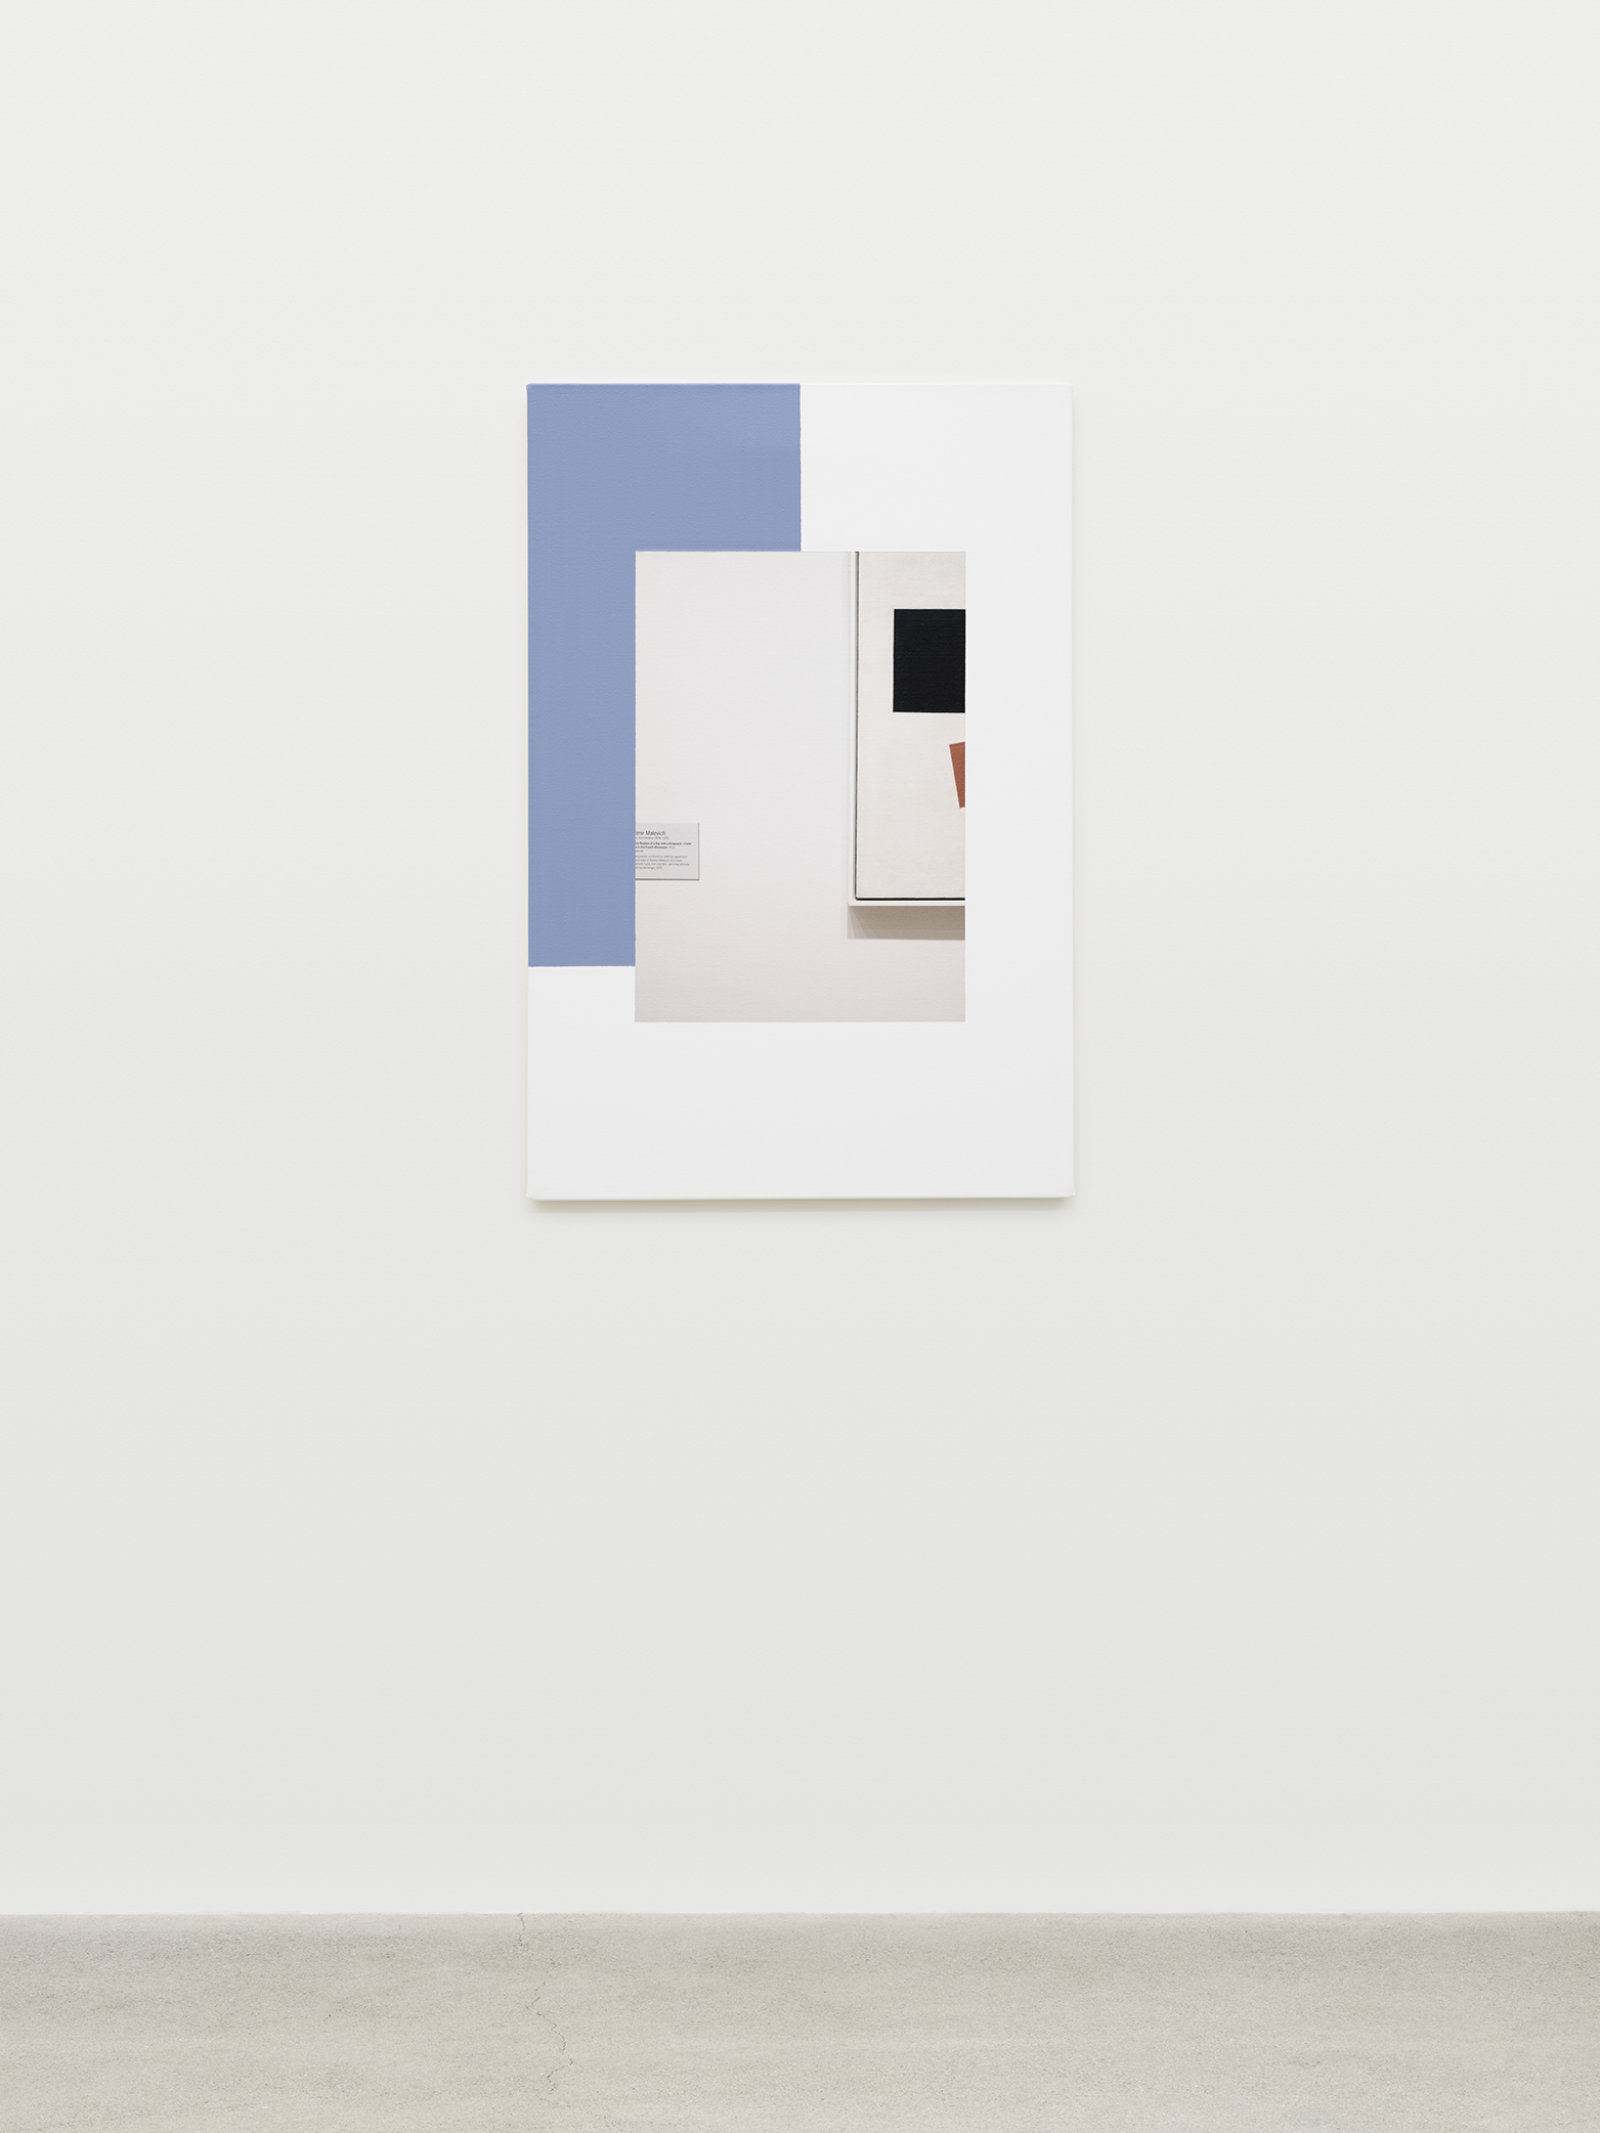 Ian Wallace, Abstract Composition (with Malevich), 2011, photolaminate with acrylic on canvas, 36 x 24 in. (91 x 61 cm)